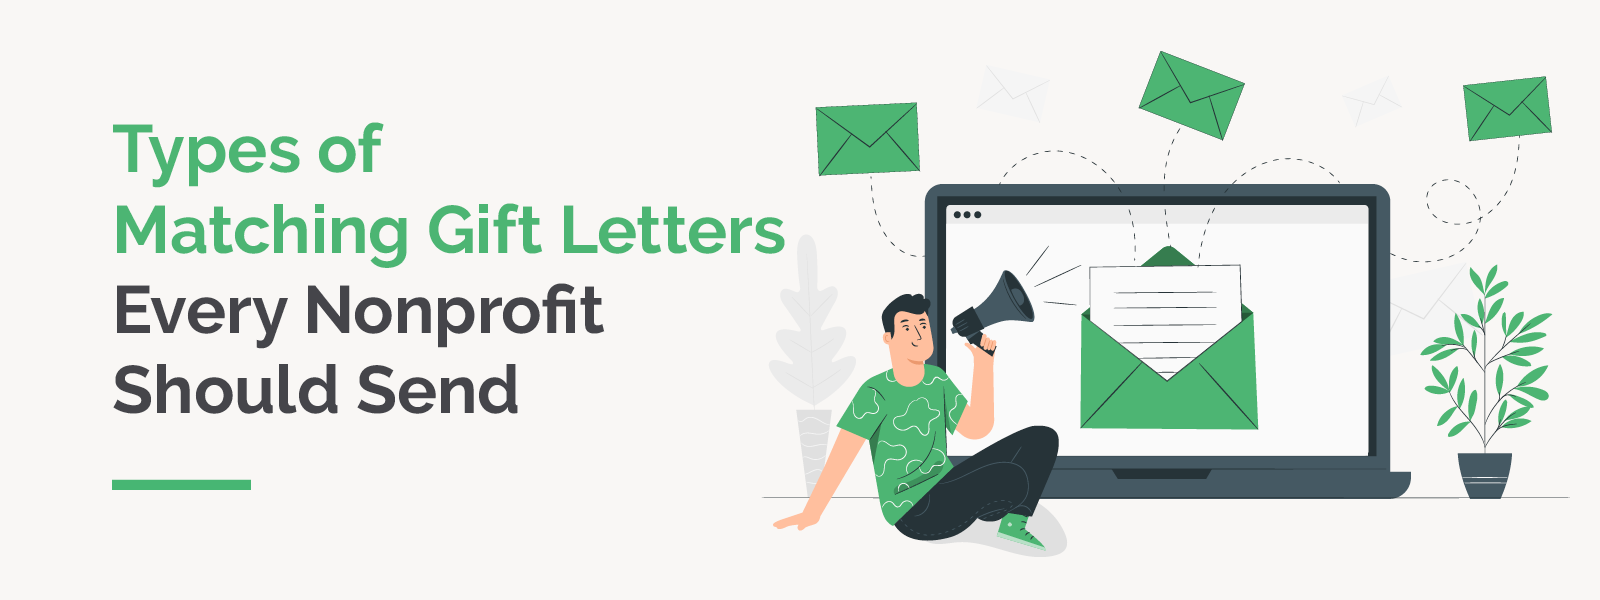 Learn more about the main types of matching gift letters that every nonprofit should be sending!